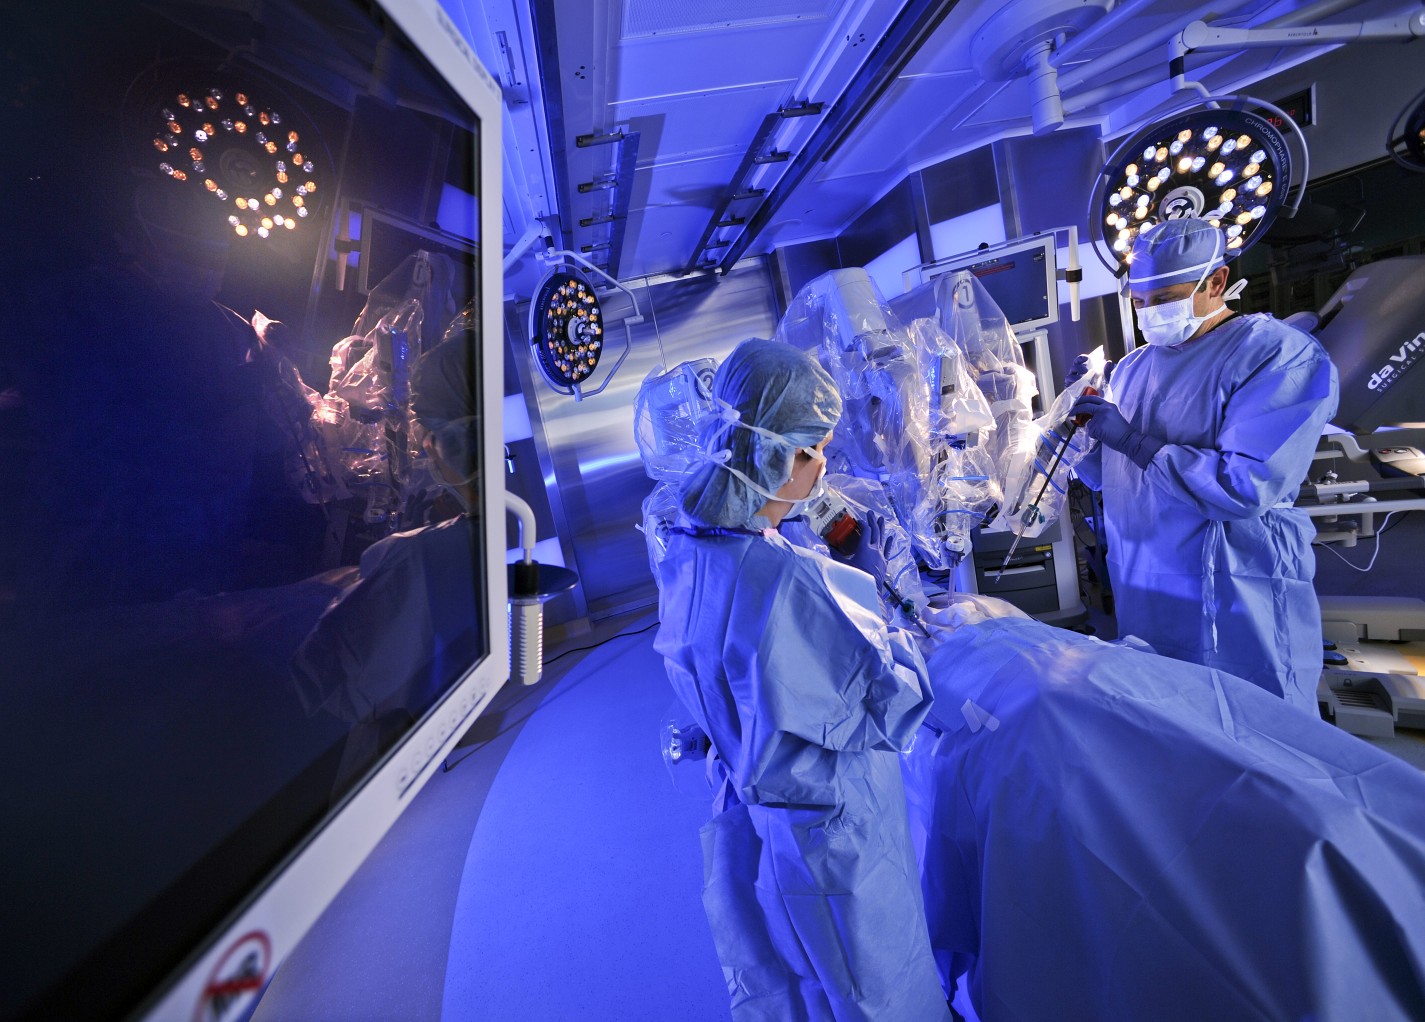 Two surgical oncologists perform one of the latest and most innovative surgical procedures for cancer in an operating room